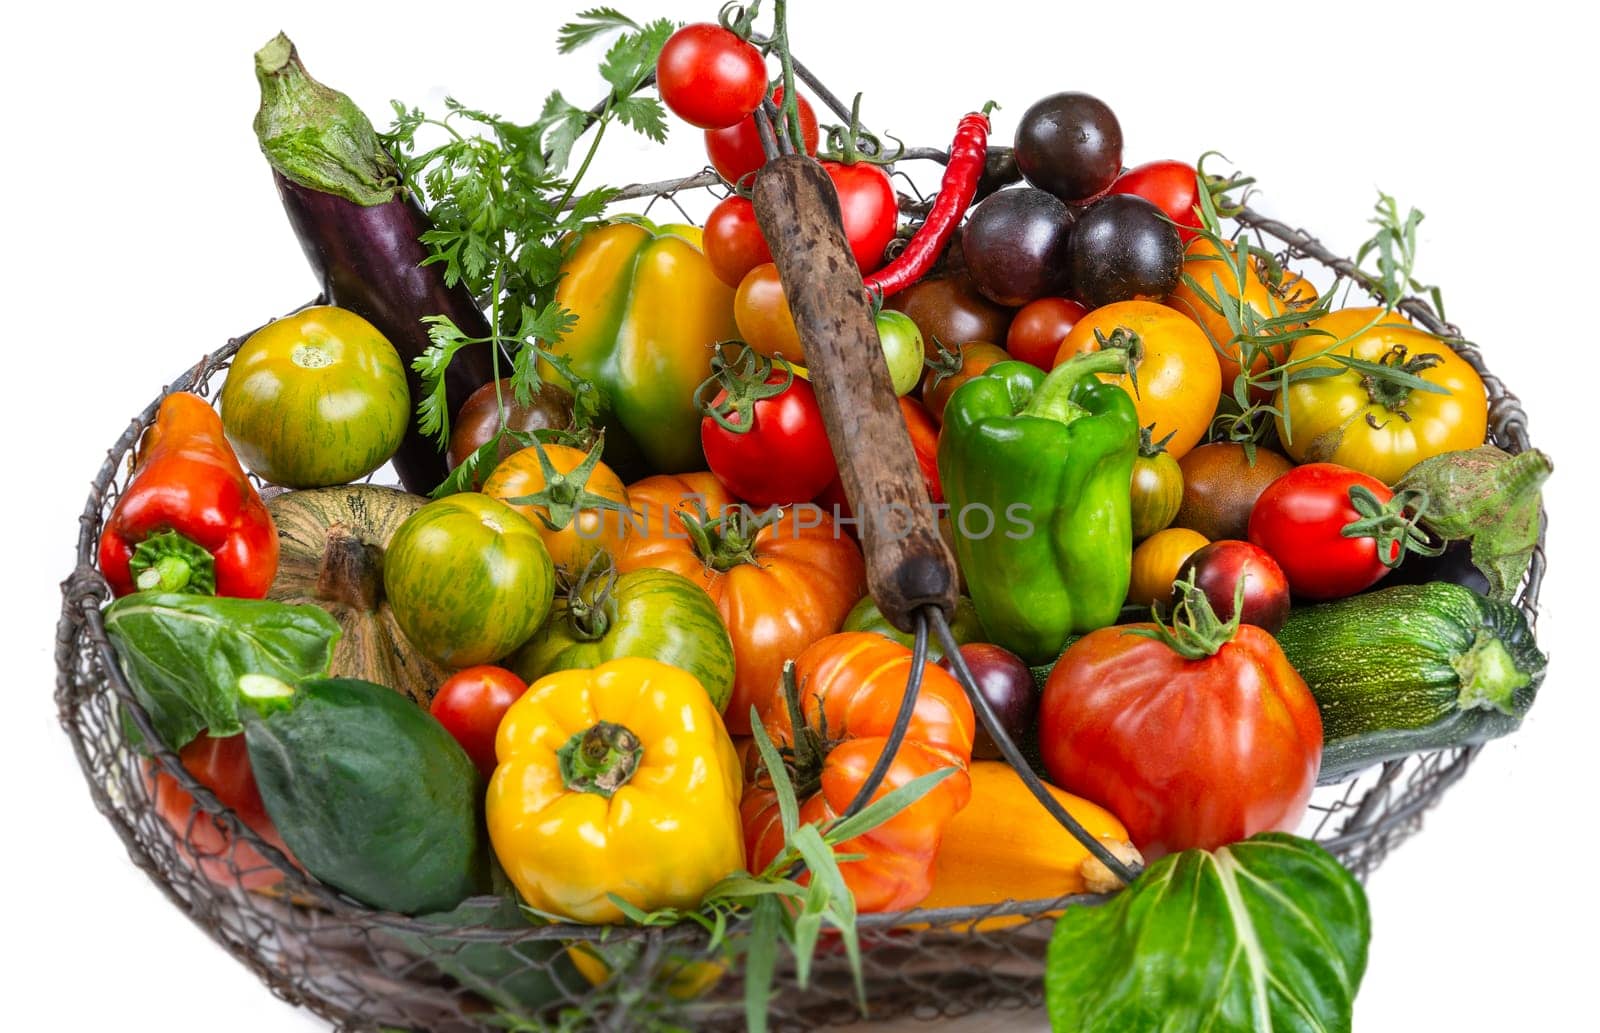 Basket with vegetables cabbage, carrots, cucumbers,butternuts tomatoes, radish ,zuchini and peppers white background ,Concept of biological, bio products, bio ecology, grown by yourself, vegetarians. by JPC-PROD